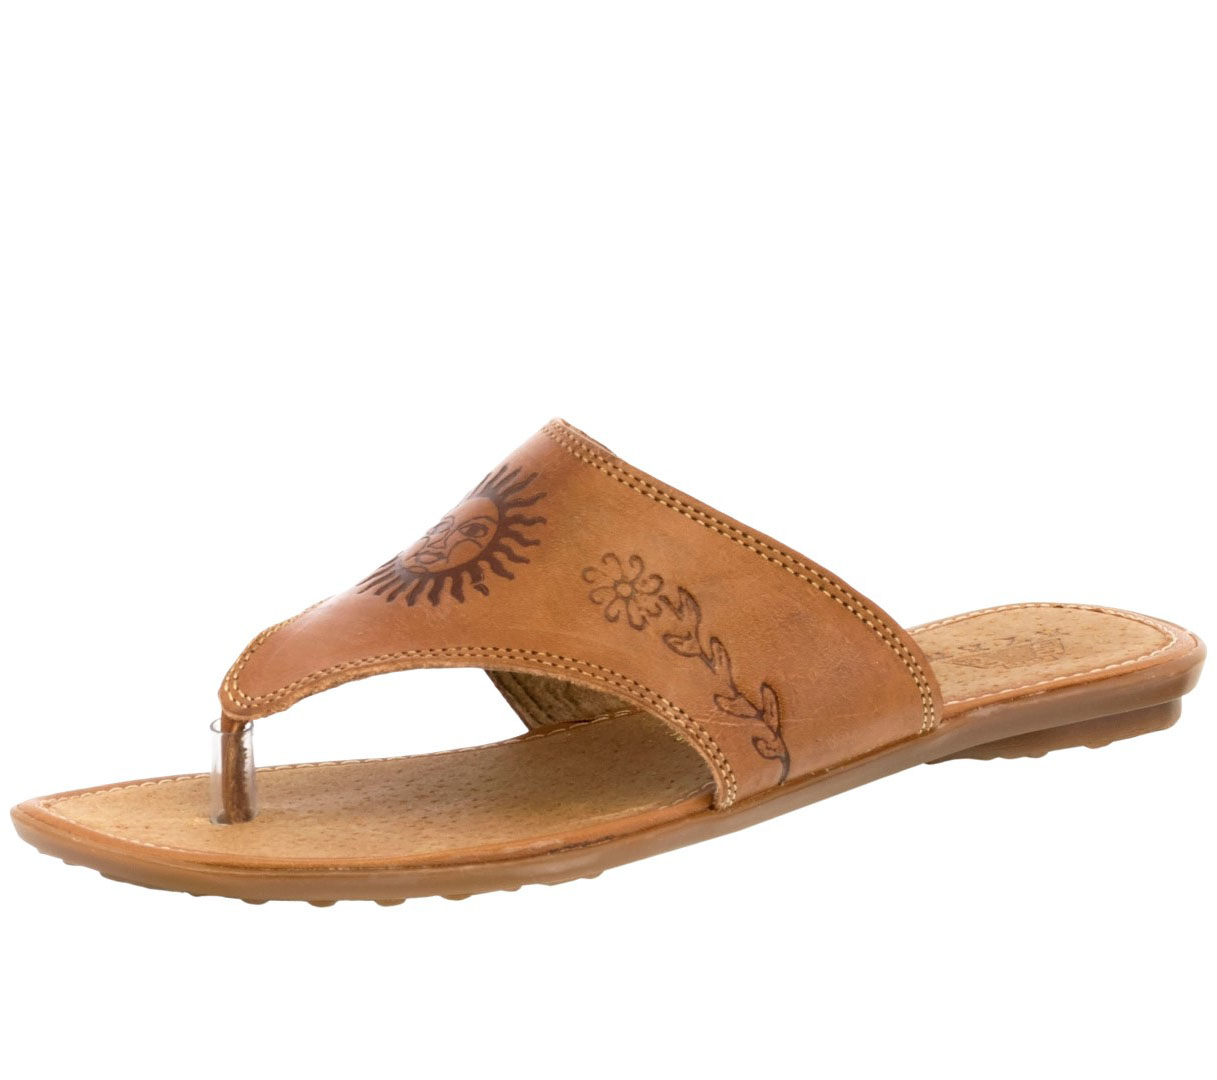 Womens Real Leather Sandals Mexican Huarache Flip Flop Light Brown ...